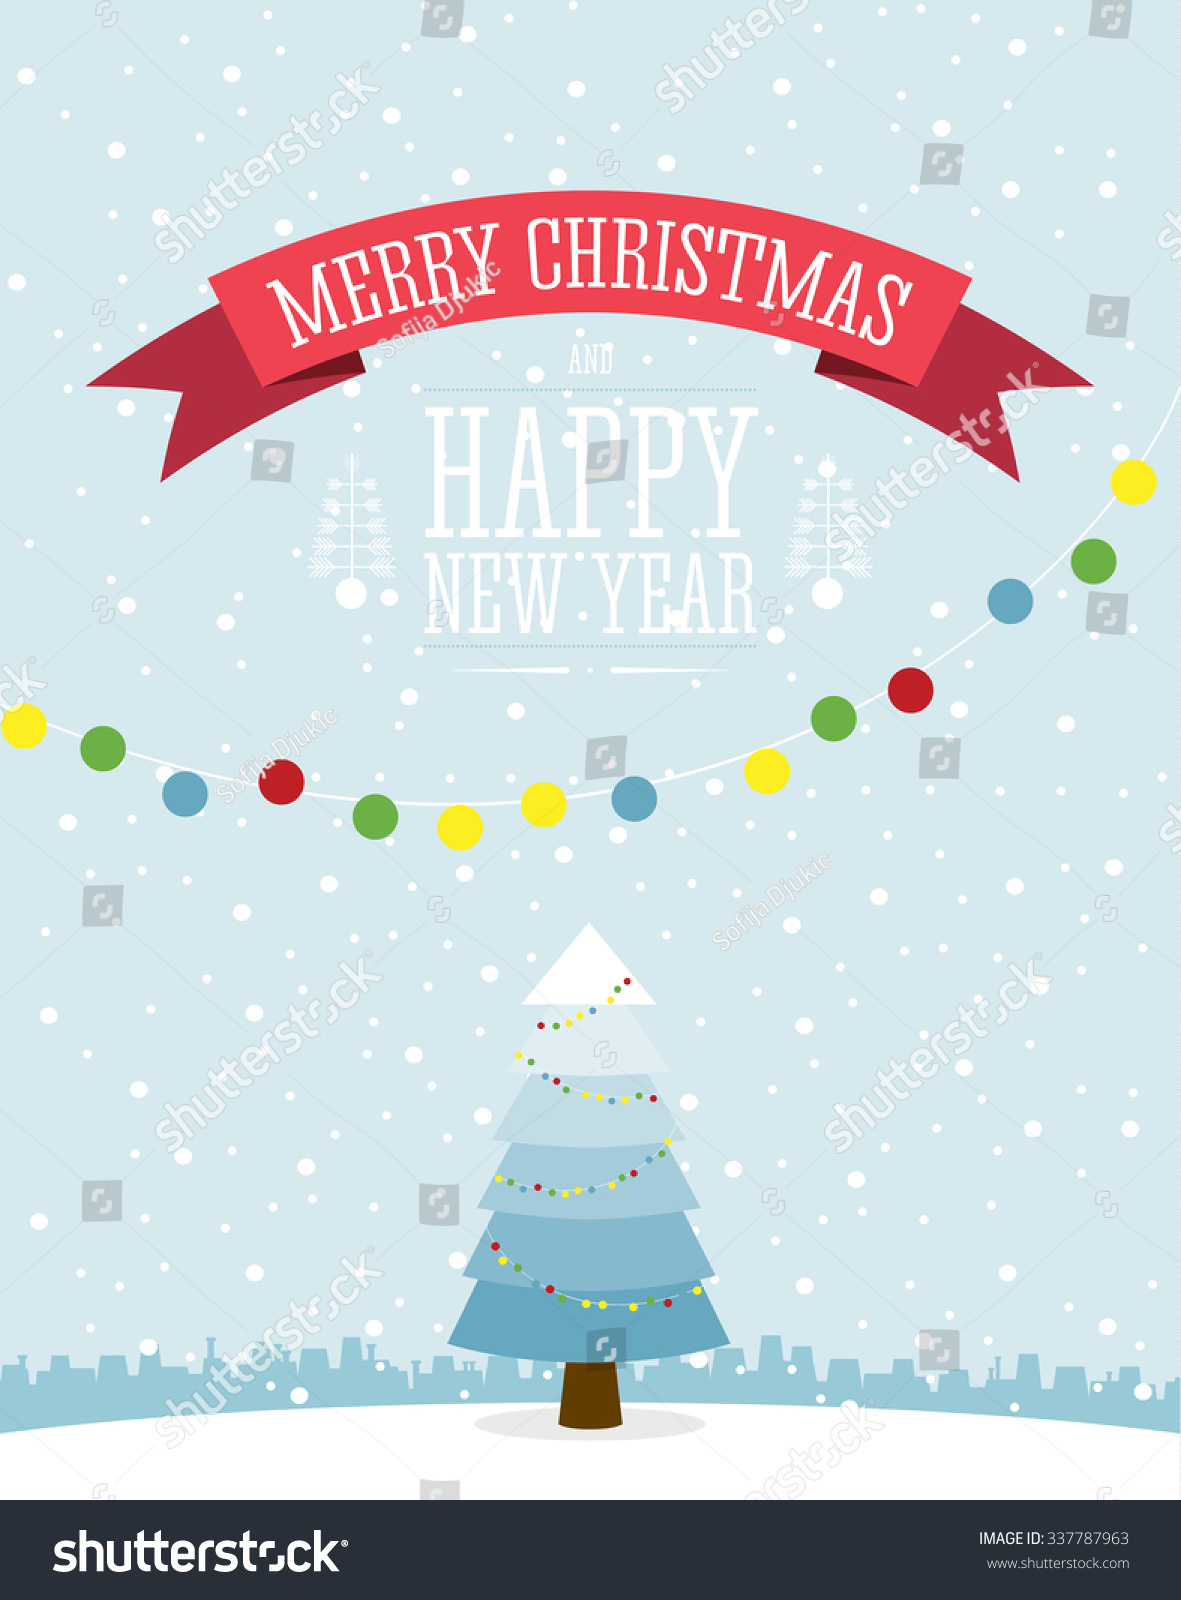 Christmas card design with Christmas decoration hanging around Christmas tree Cute tree standing alone on